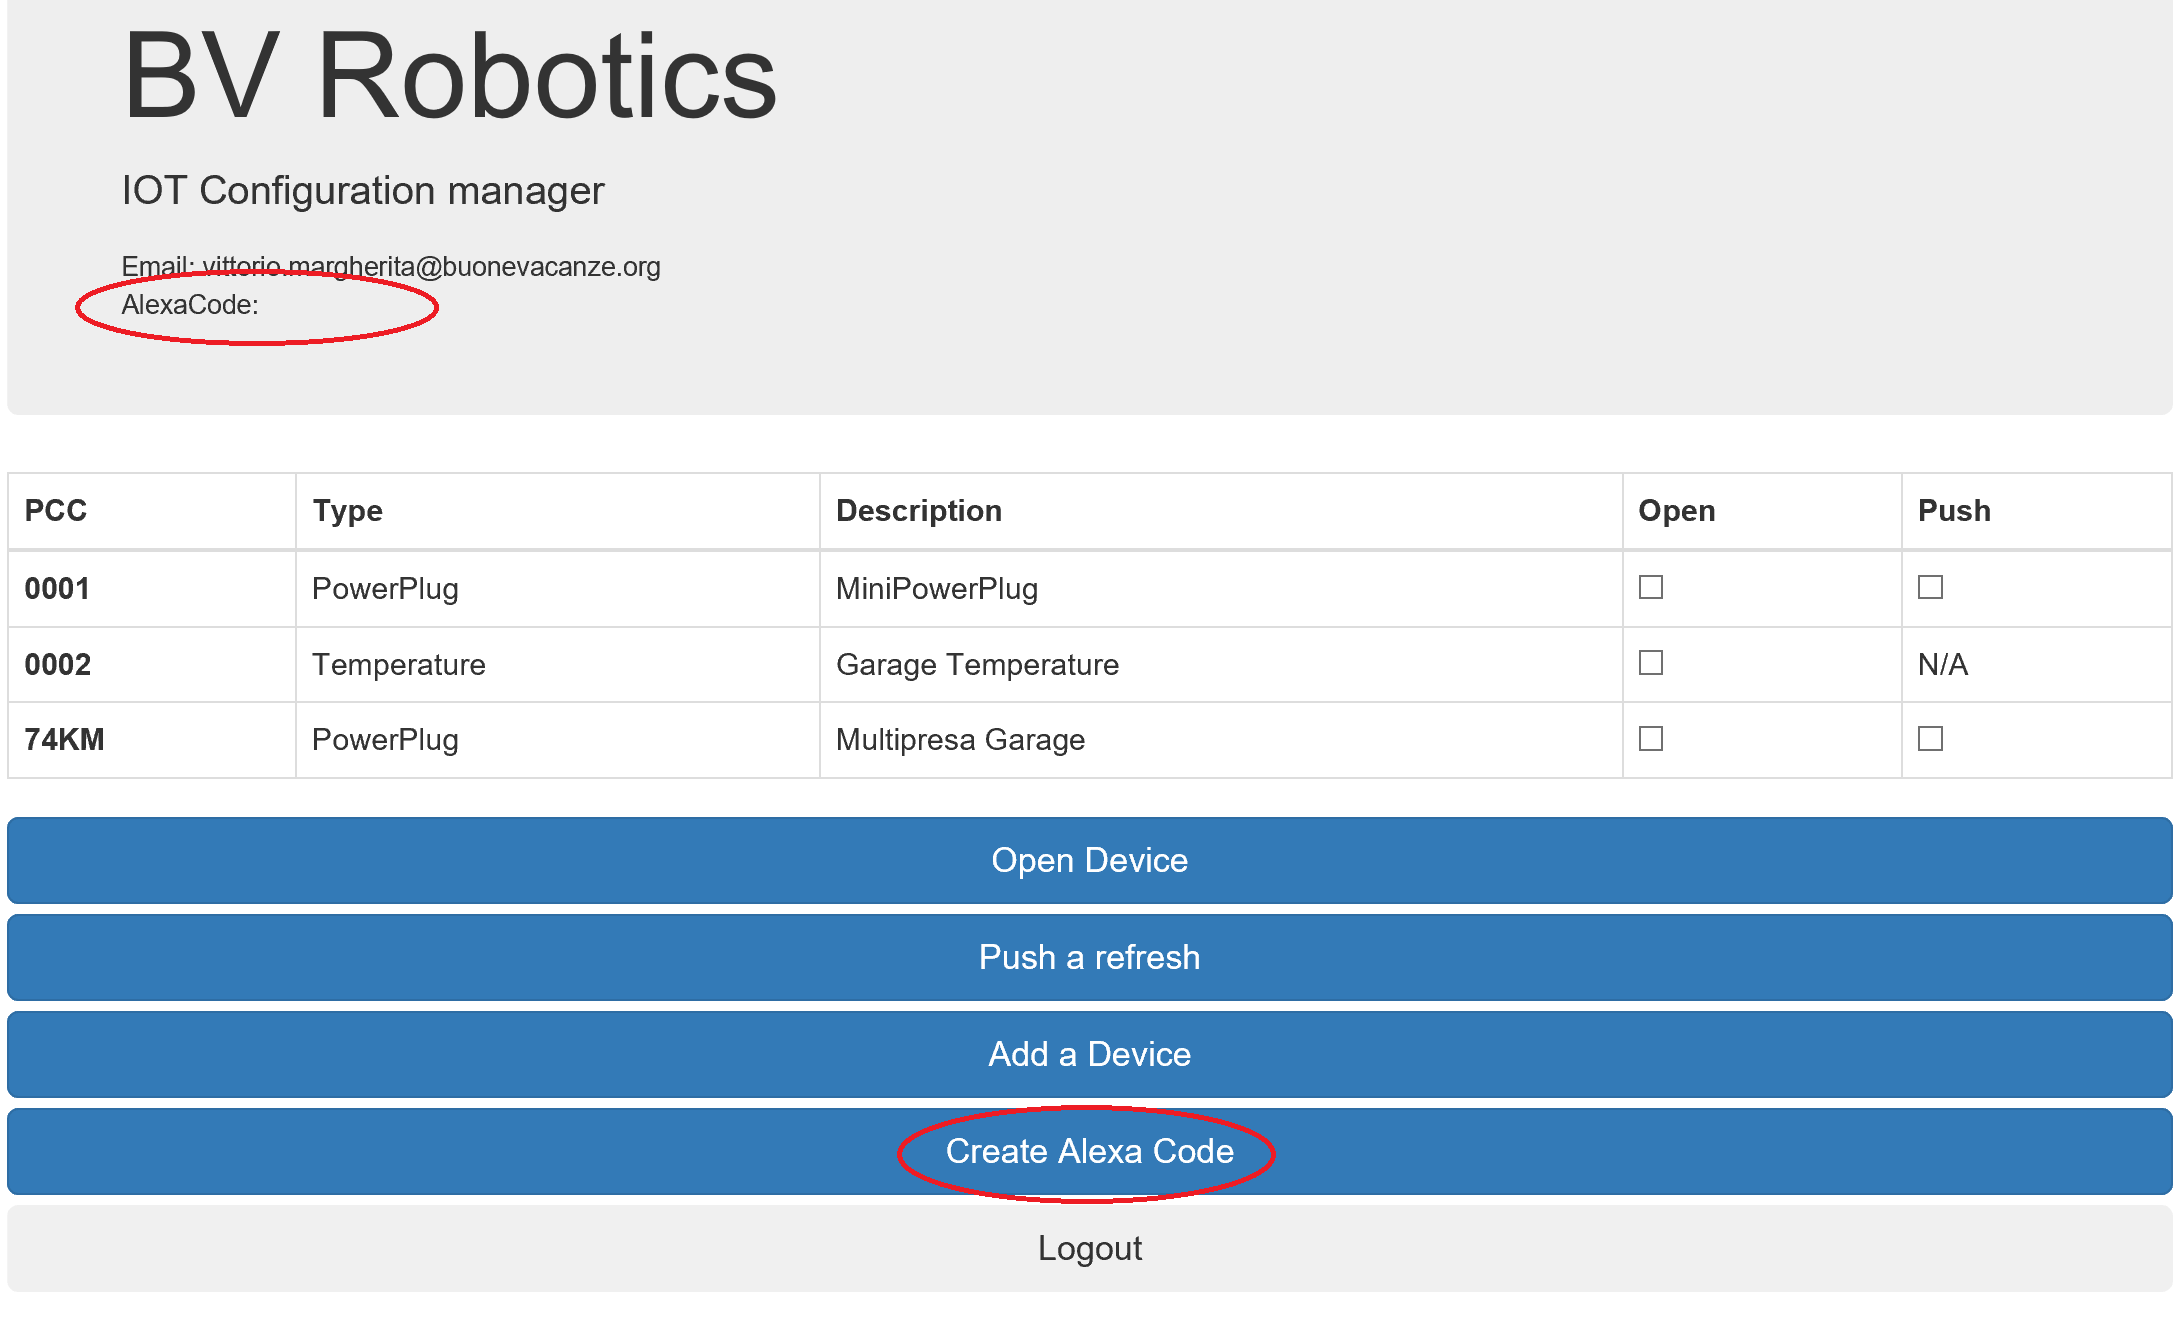 The main page of the BVIoTManager web app with some buttons and fields evidenced to indicate how to create an Alexa UID